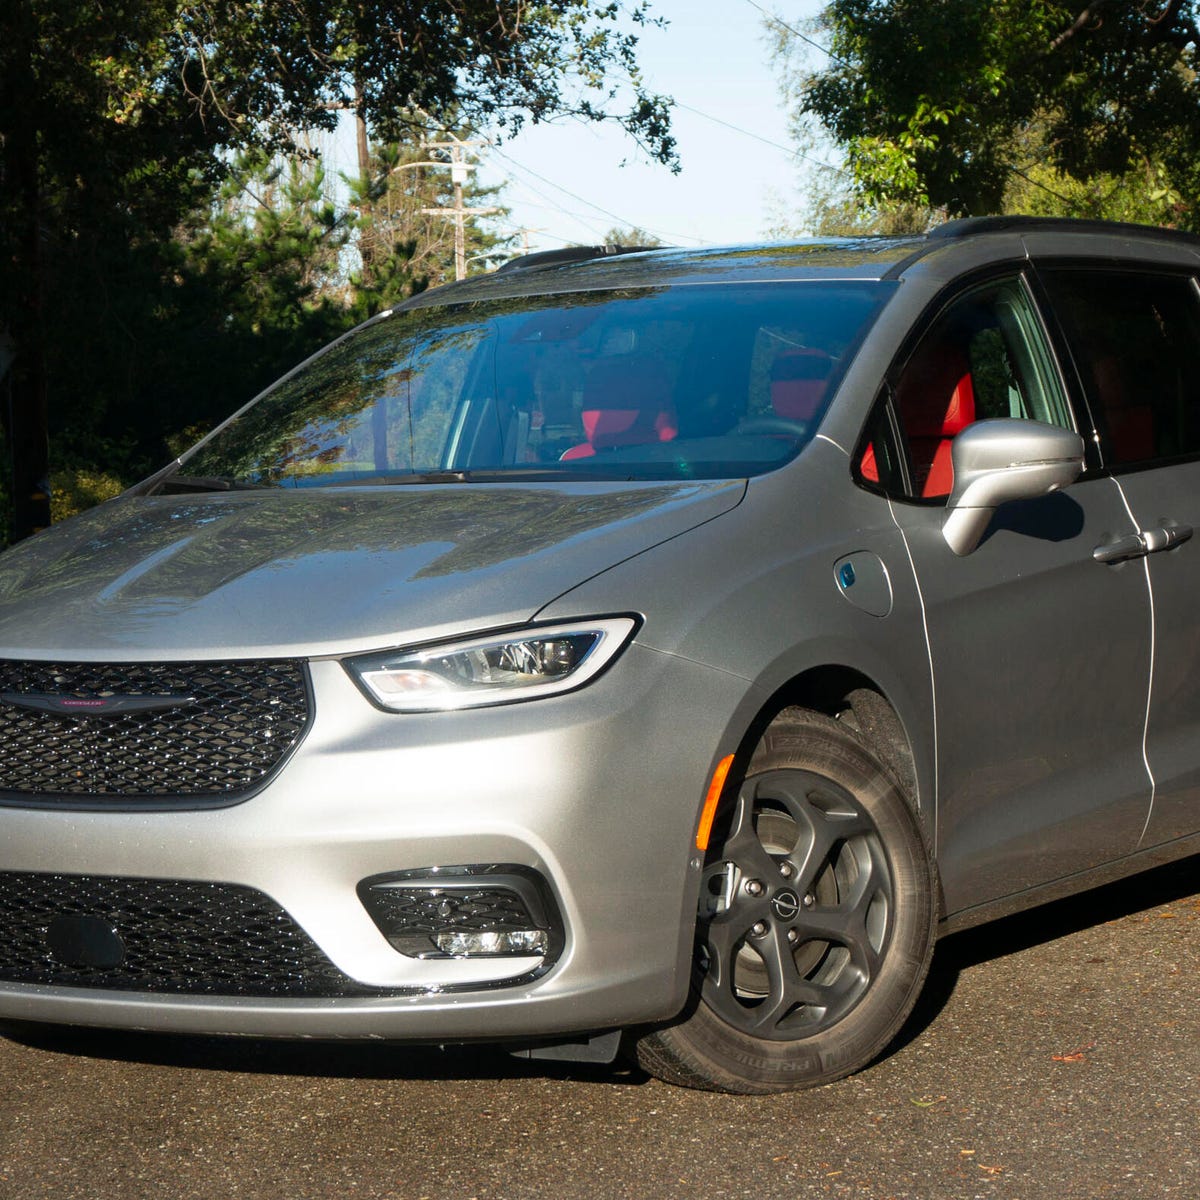 2021 Chrysler Pacifica Hybrid review: Practical plug-in - CNET